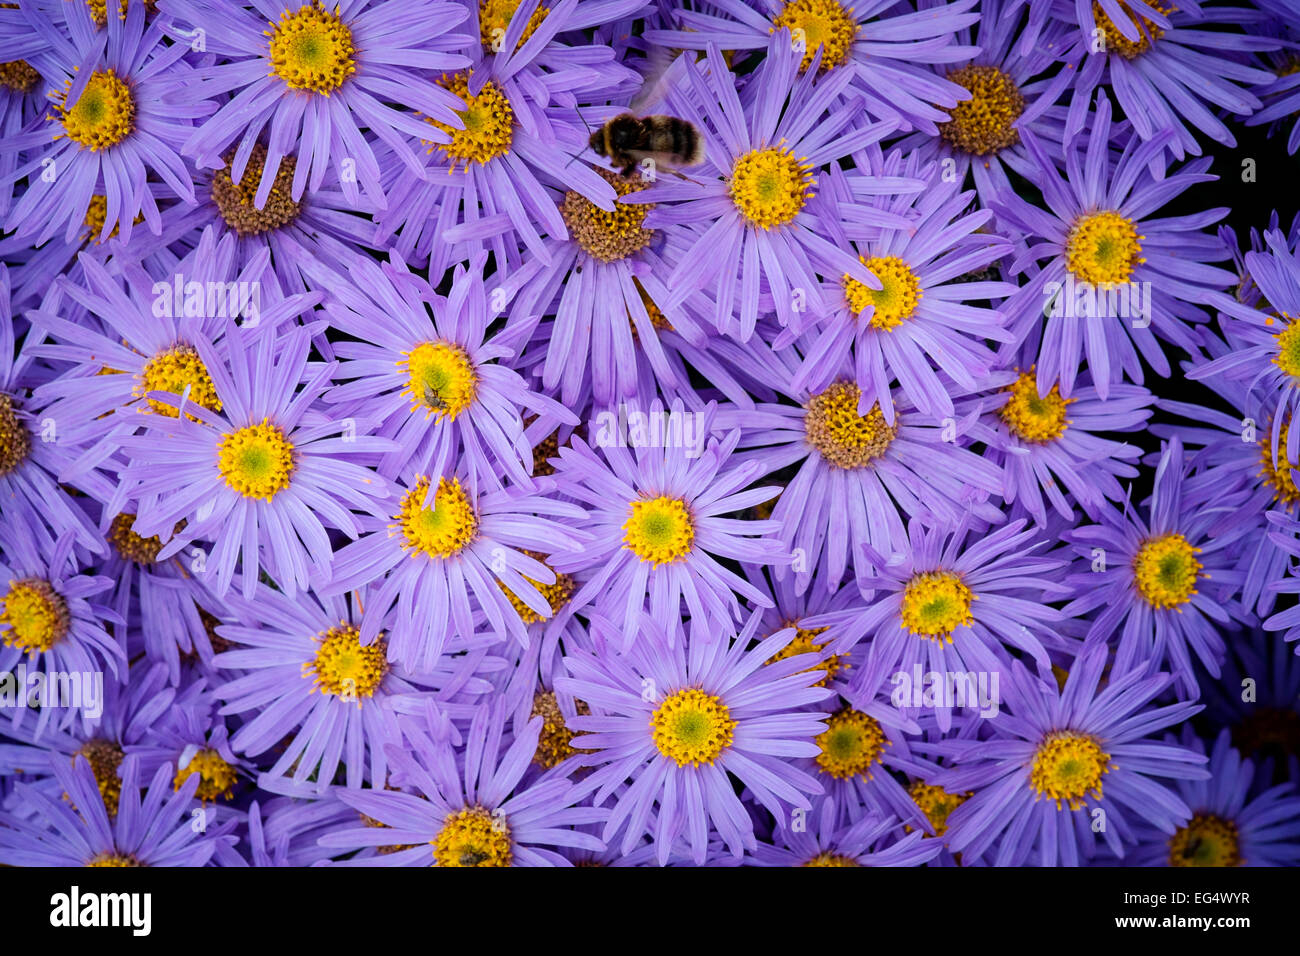 Overhead view of bumble bee on purple aster flower heads Stock Photo